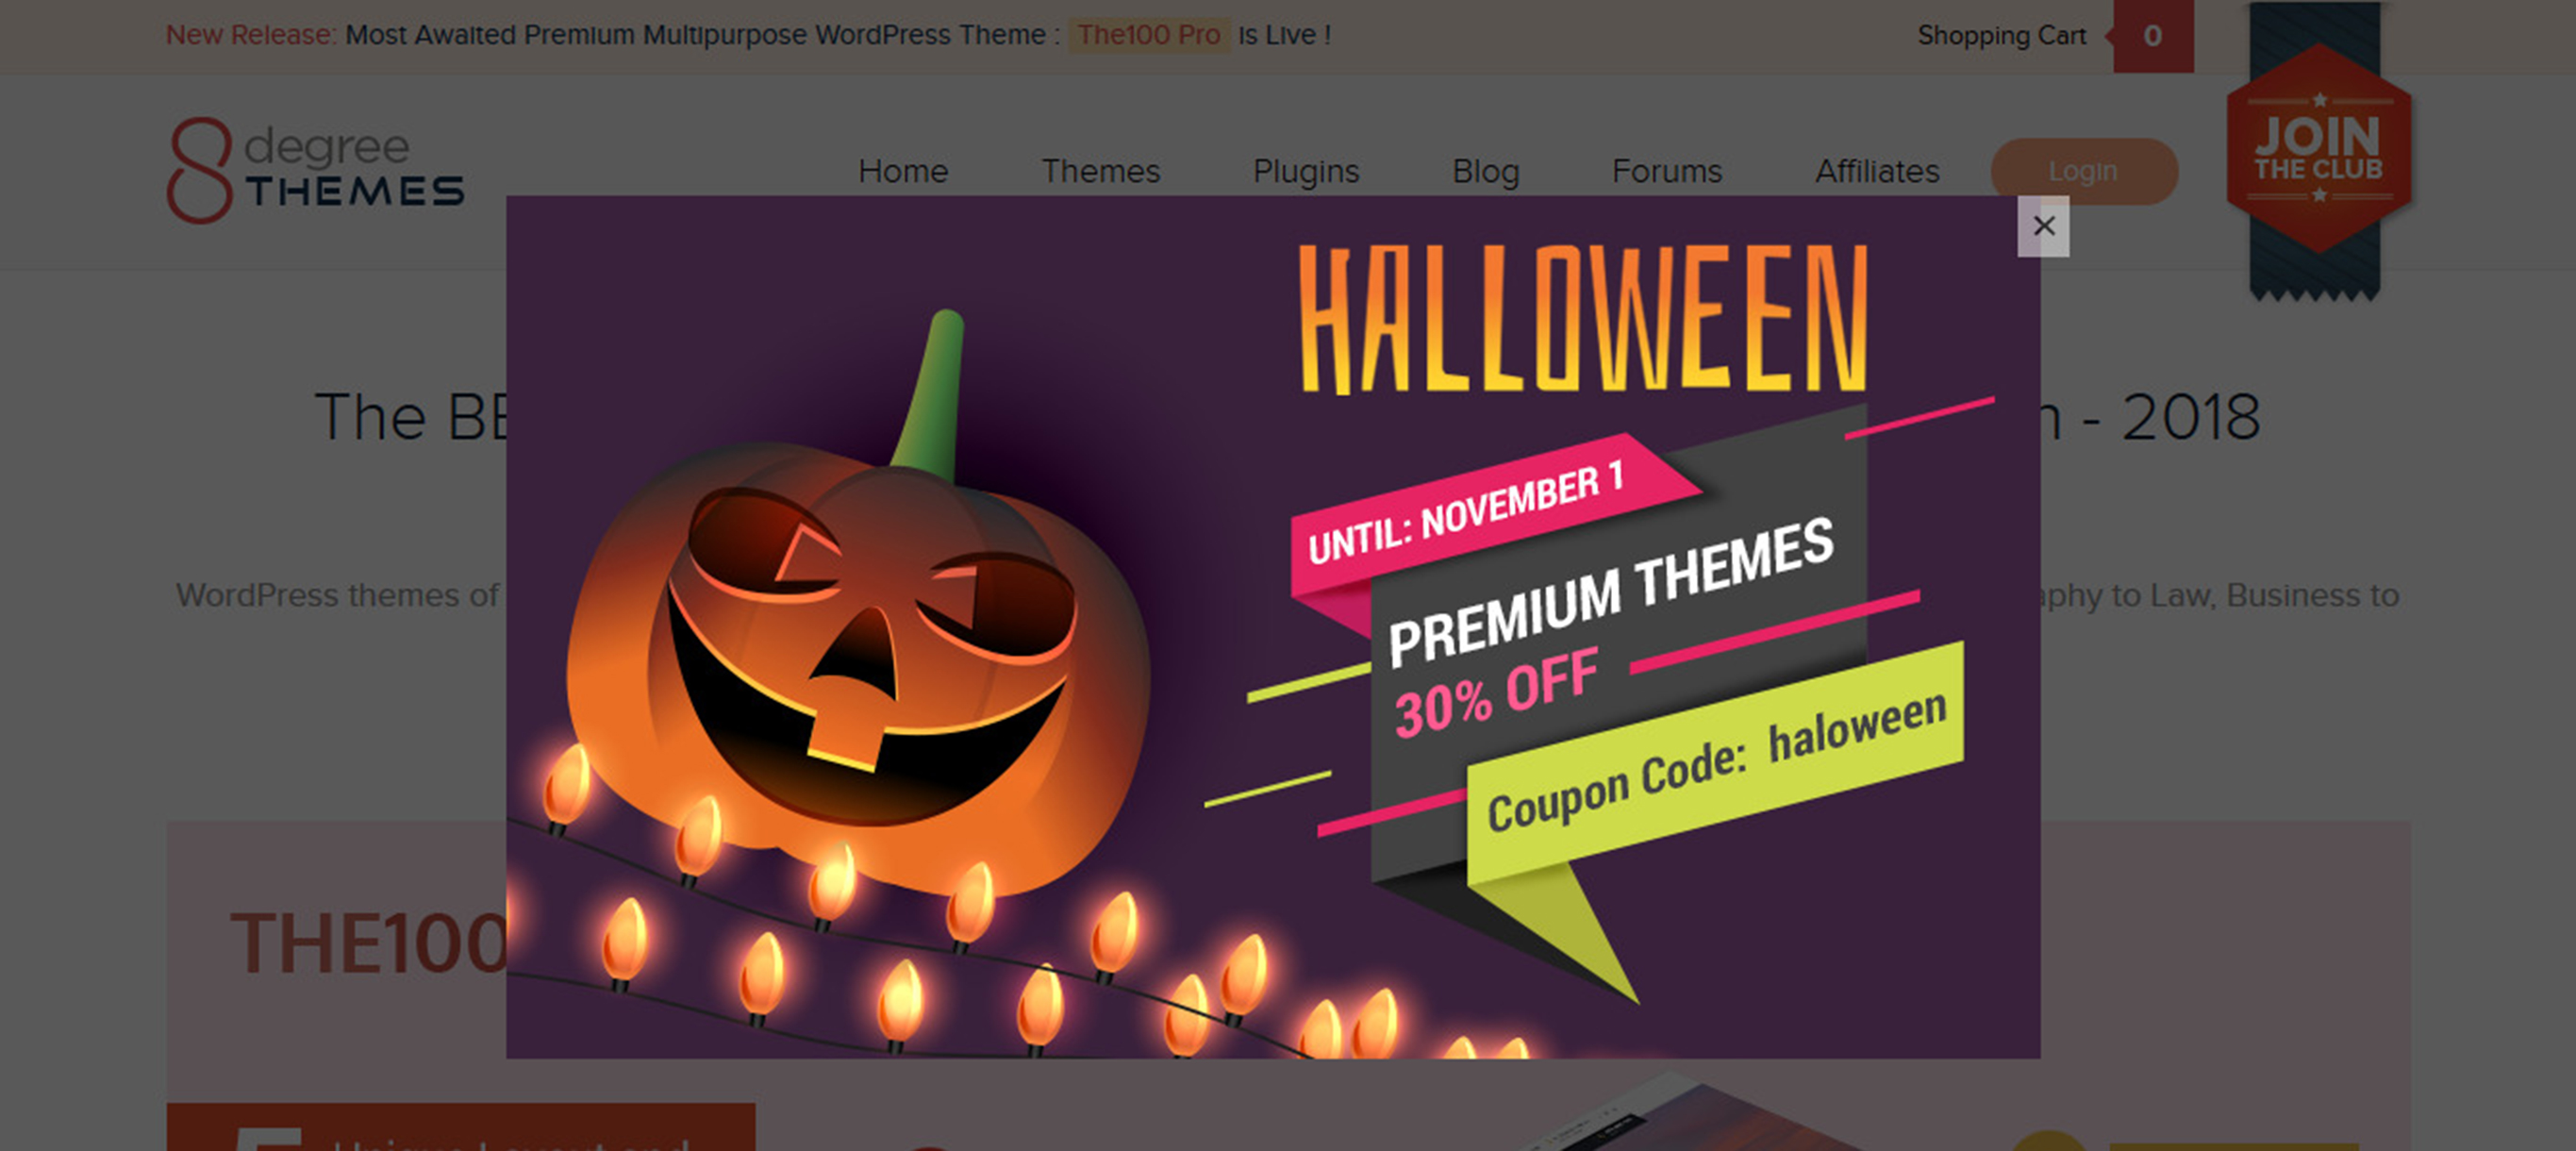 WordPress Deals and Discounts for Halloween 2018 - 8Degree Themes